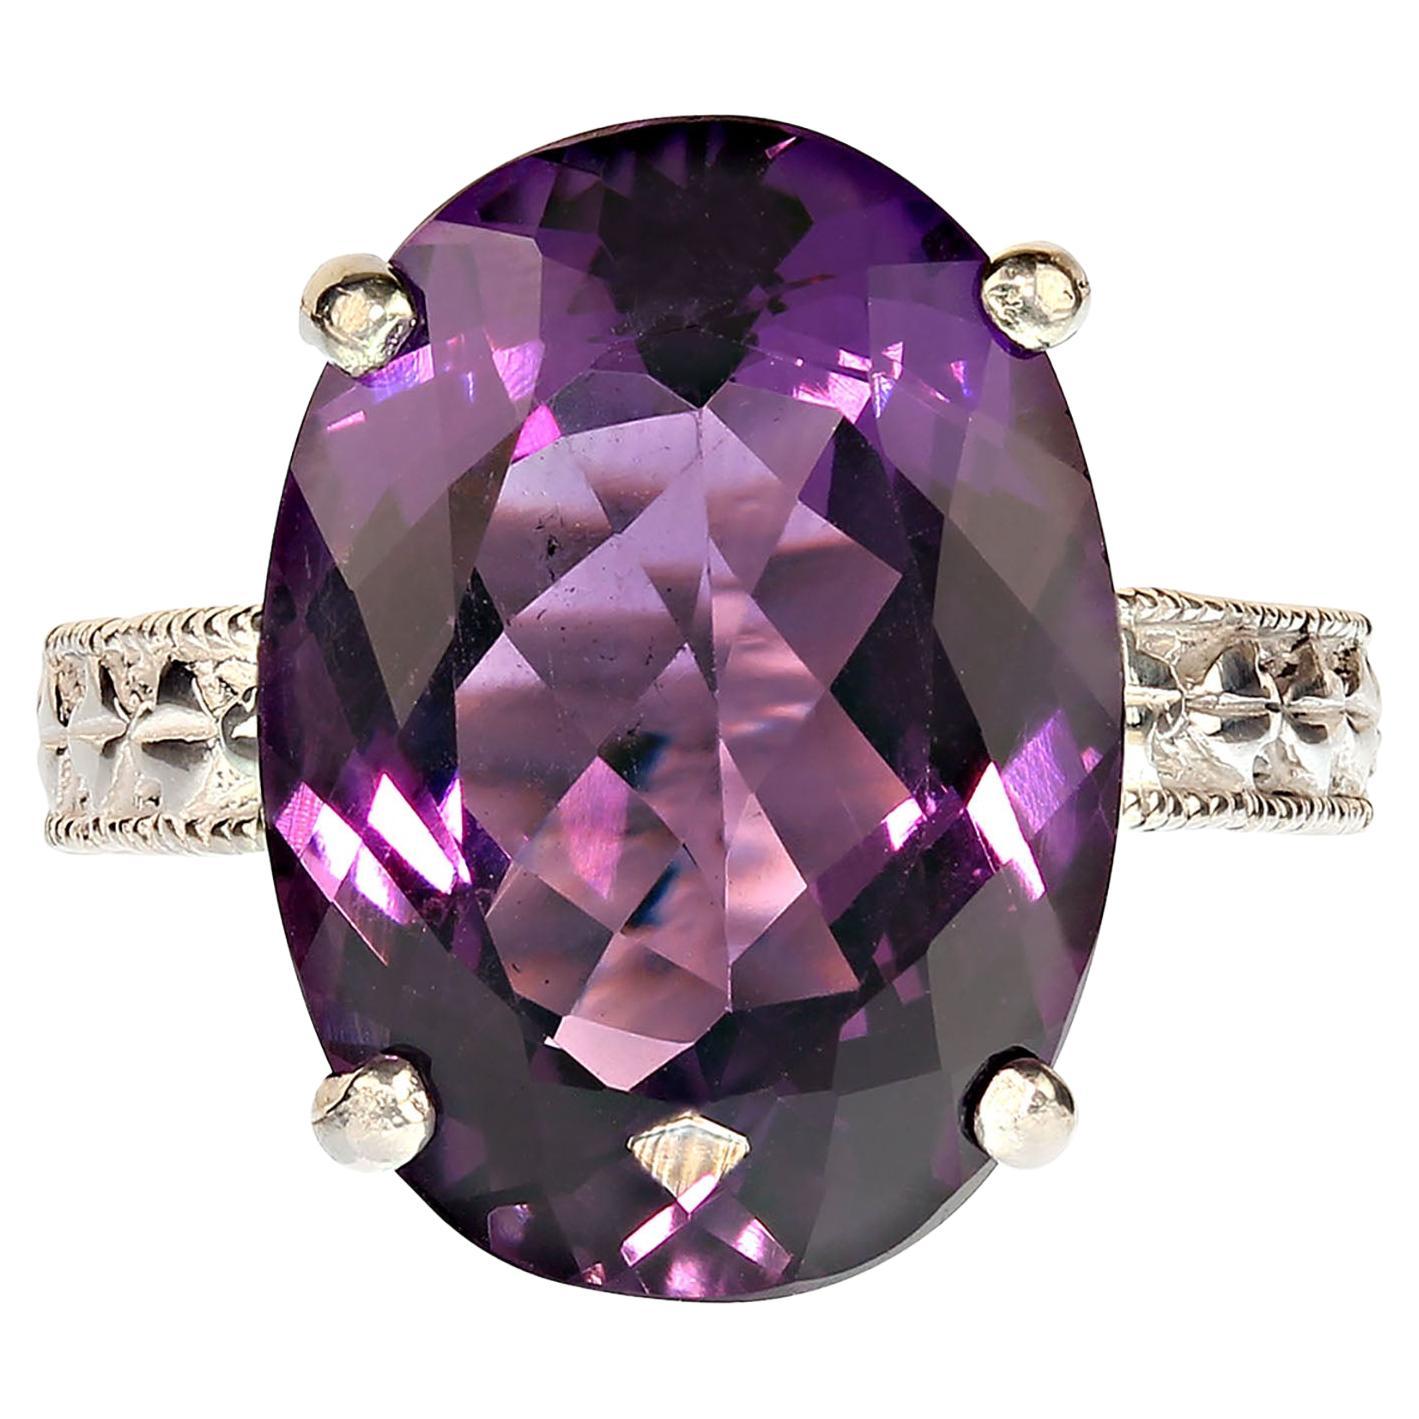 Dazzling oval Amethyst, 12.8 carats, set in 4 prong engraved Sterling Silver ring in perfect for all occaisions.  This brilliant gemstone comes from our favorite supplier up in the mountains outside of Rio de Janeiro.  It's a fabulous medium deep